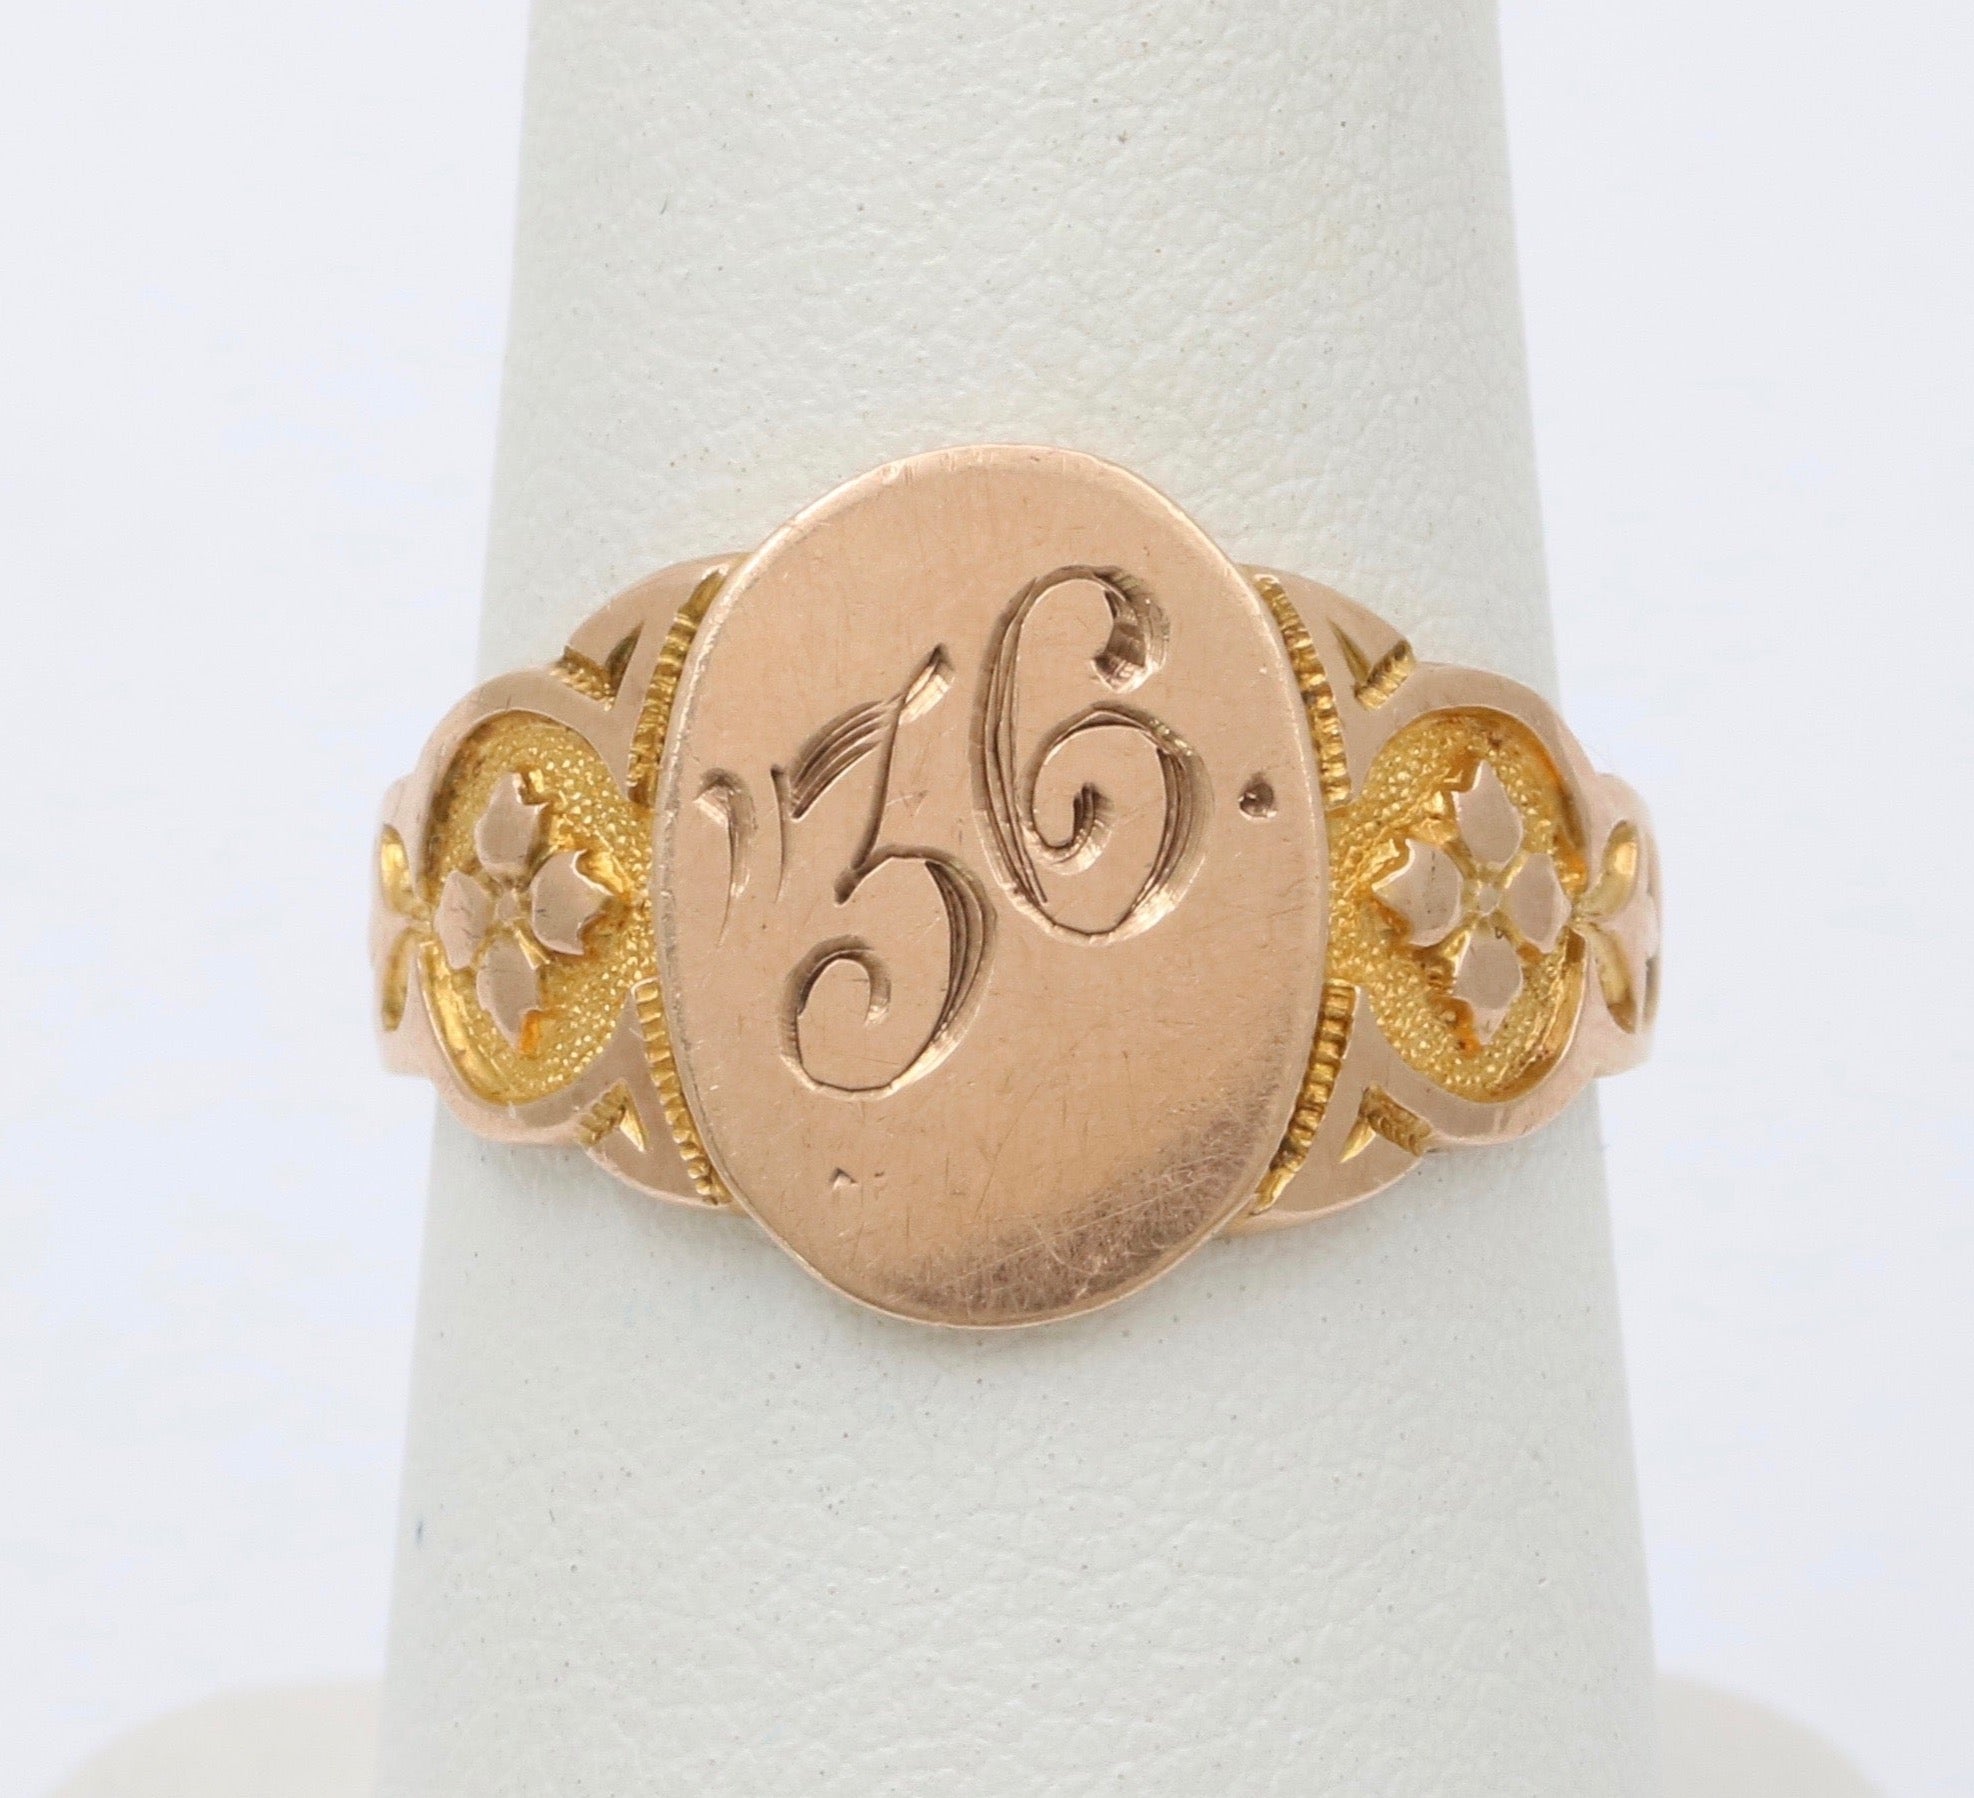 Art Deco Ostby and Barton 10K Gold “1936” Date Ring
– Alpha & Omega Jewelry